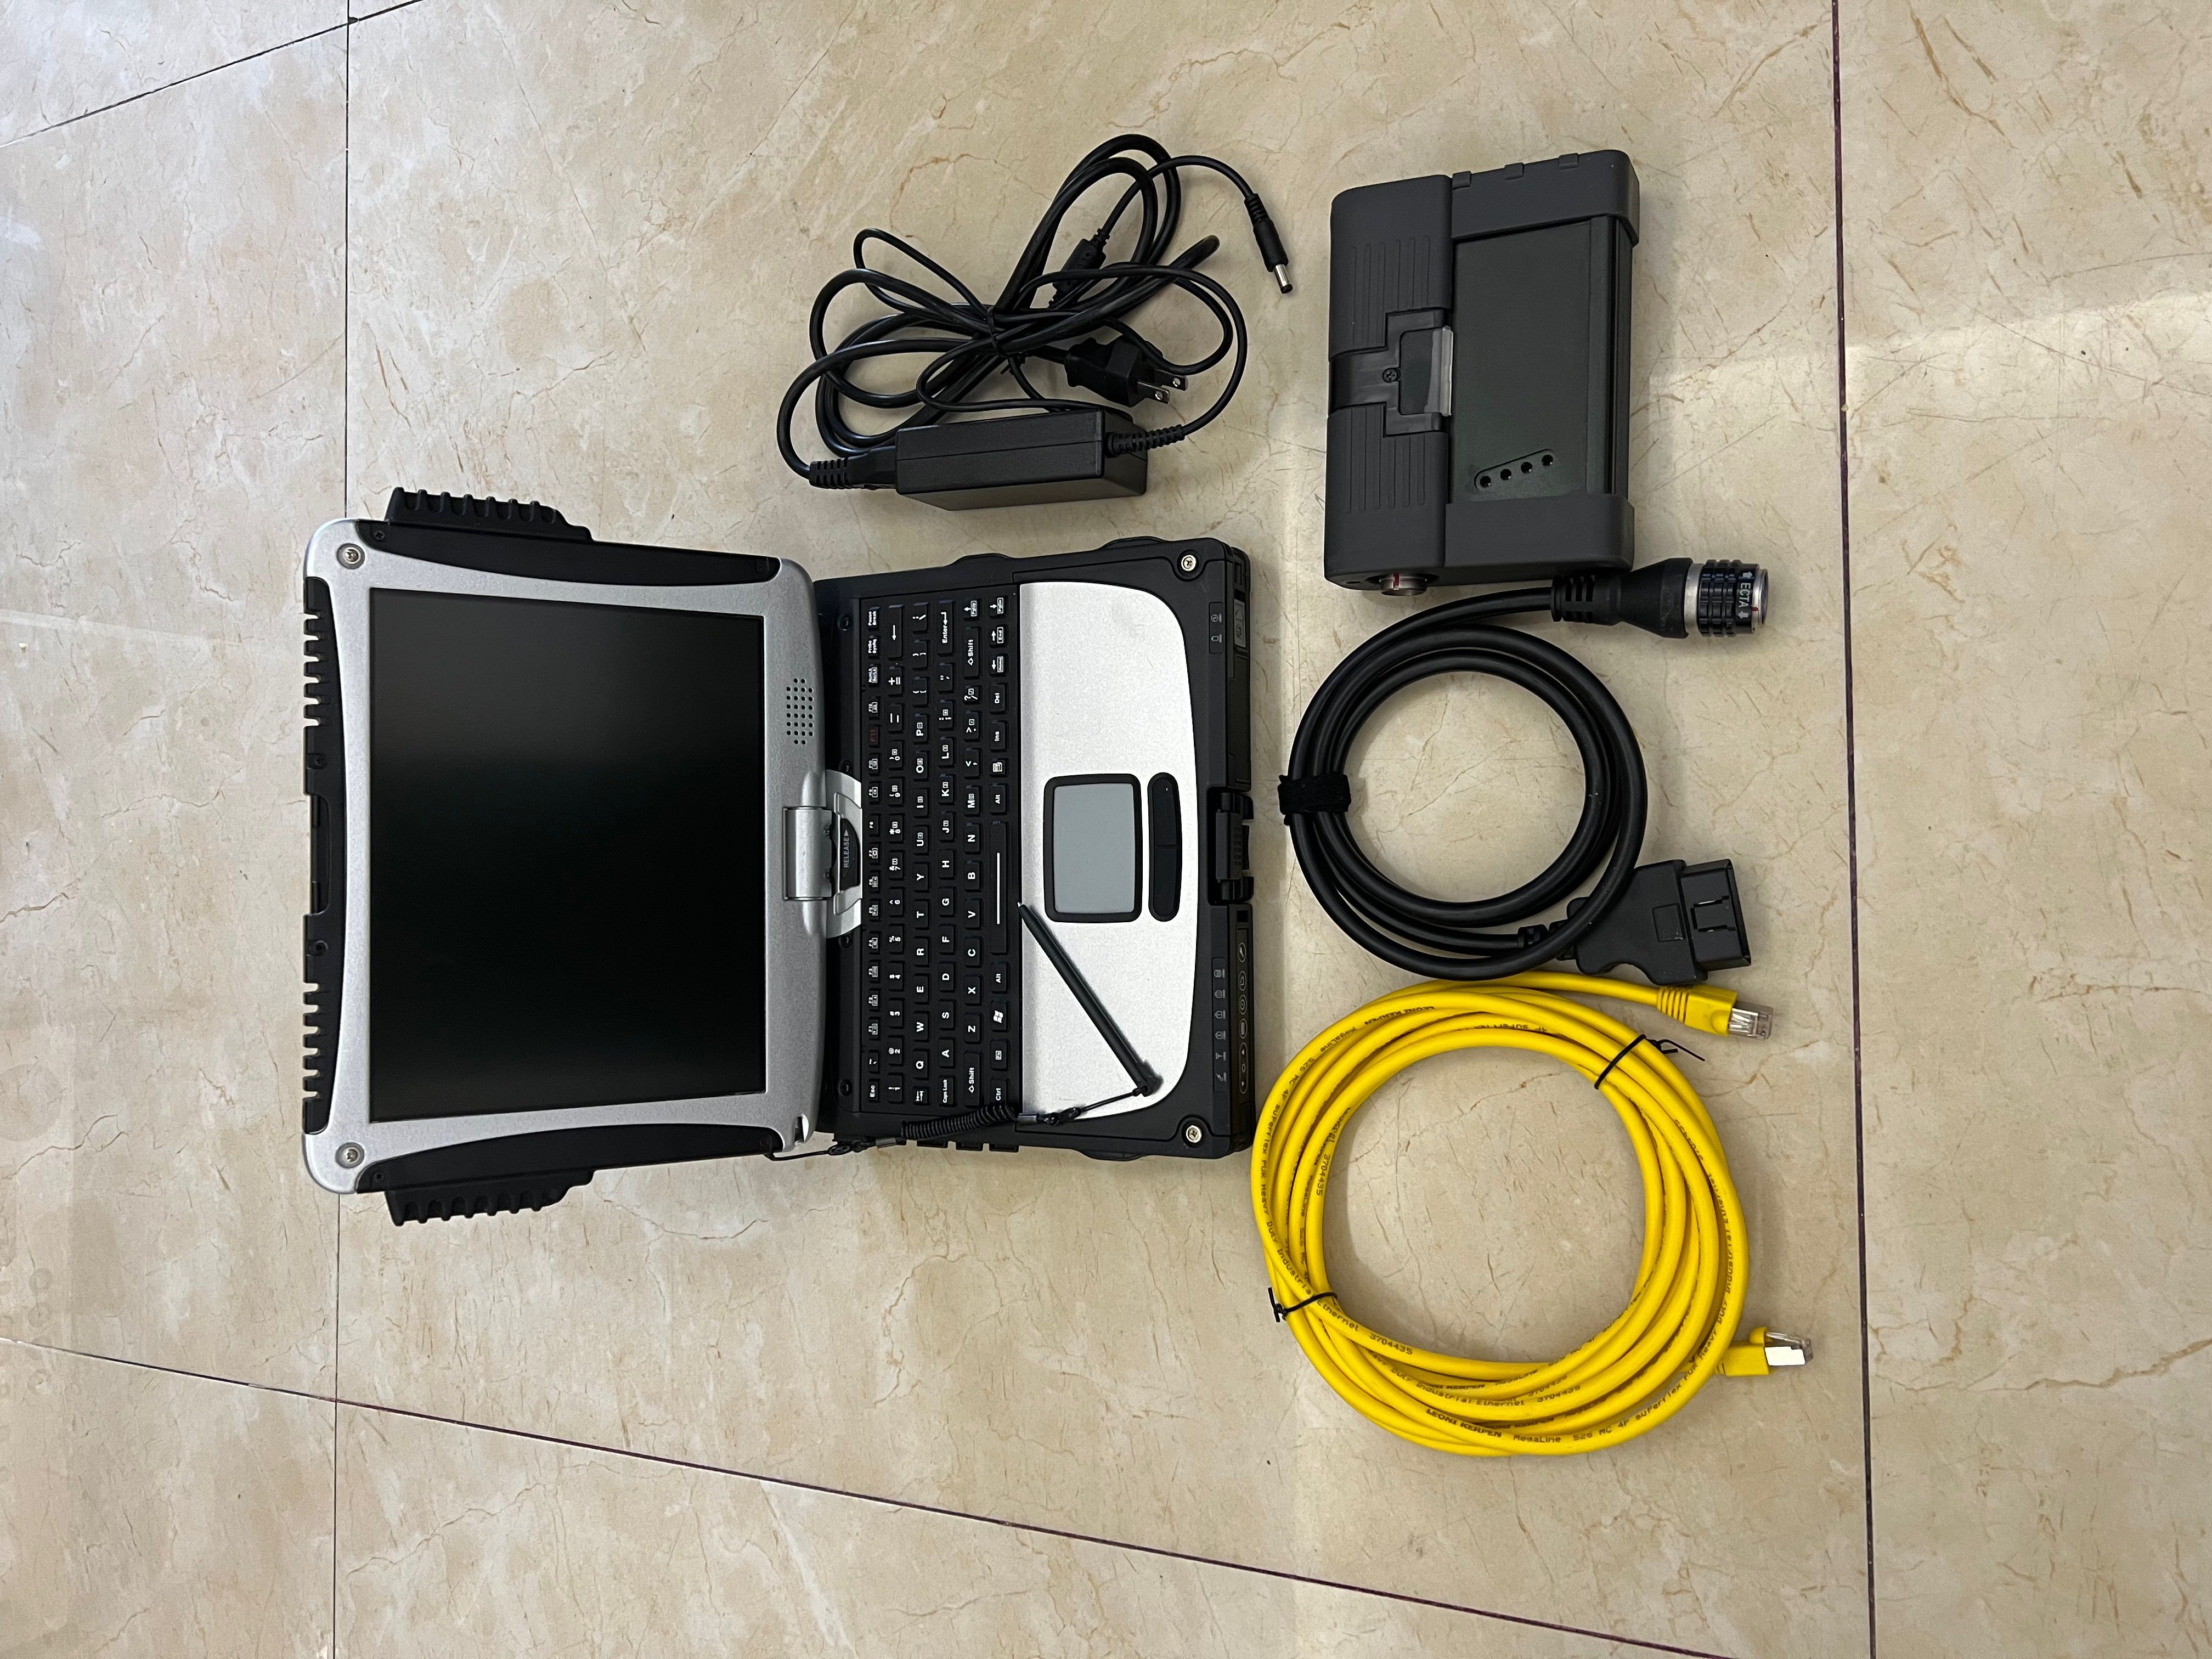 2023.12V for BMW ICOM A2 Diagnostic Tool Plus Panasonic CF19 I5 8G Laptop with 1000G SSD Ready to Use